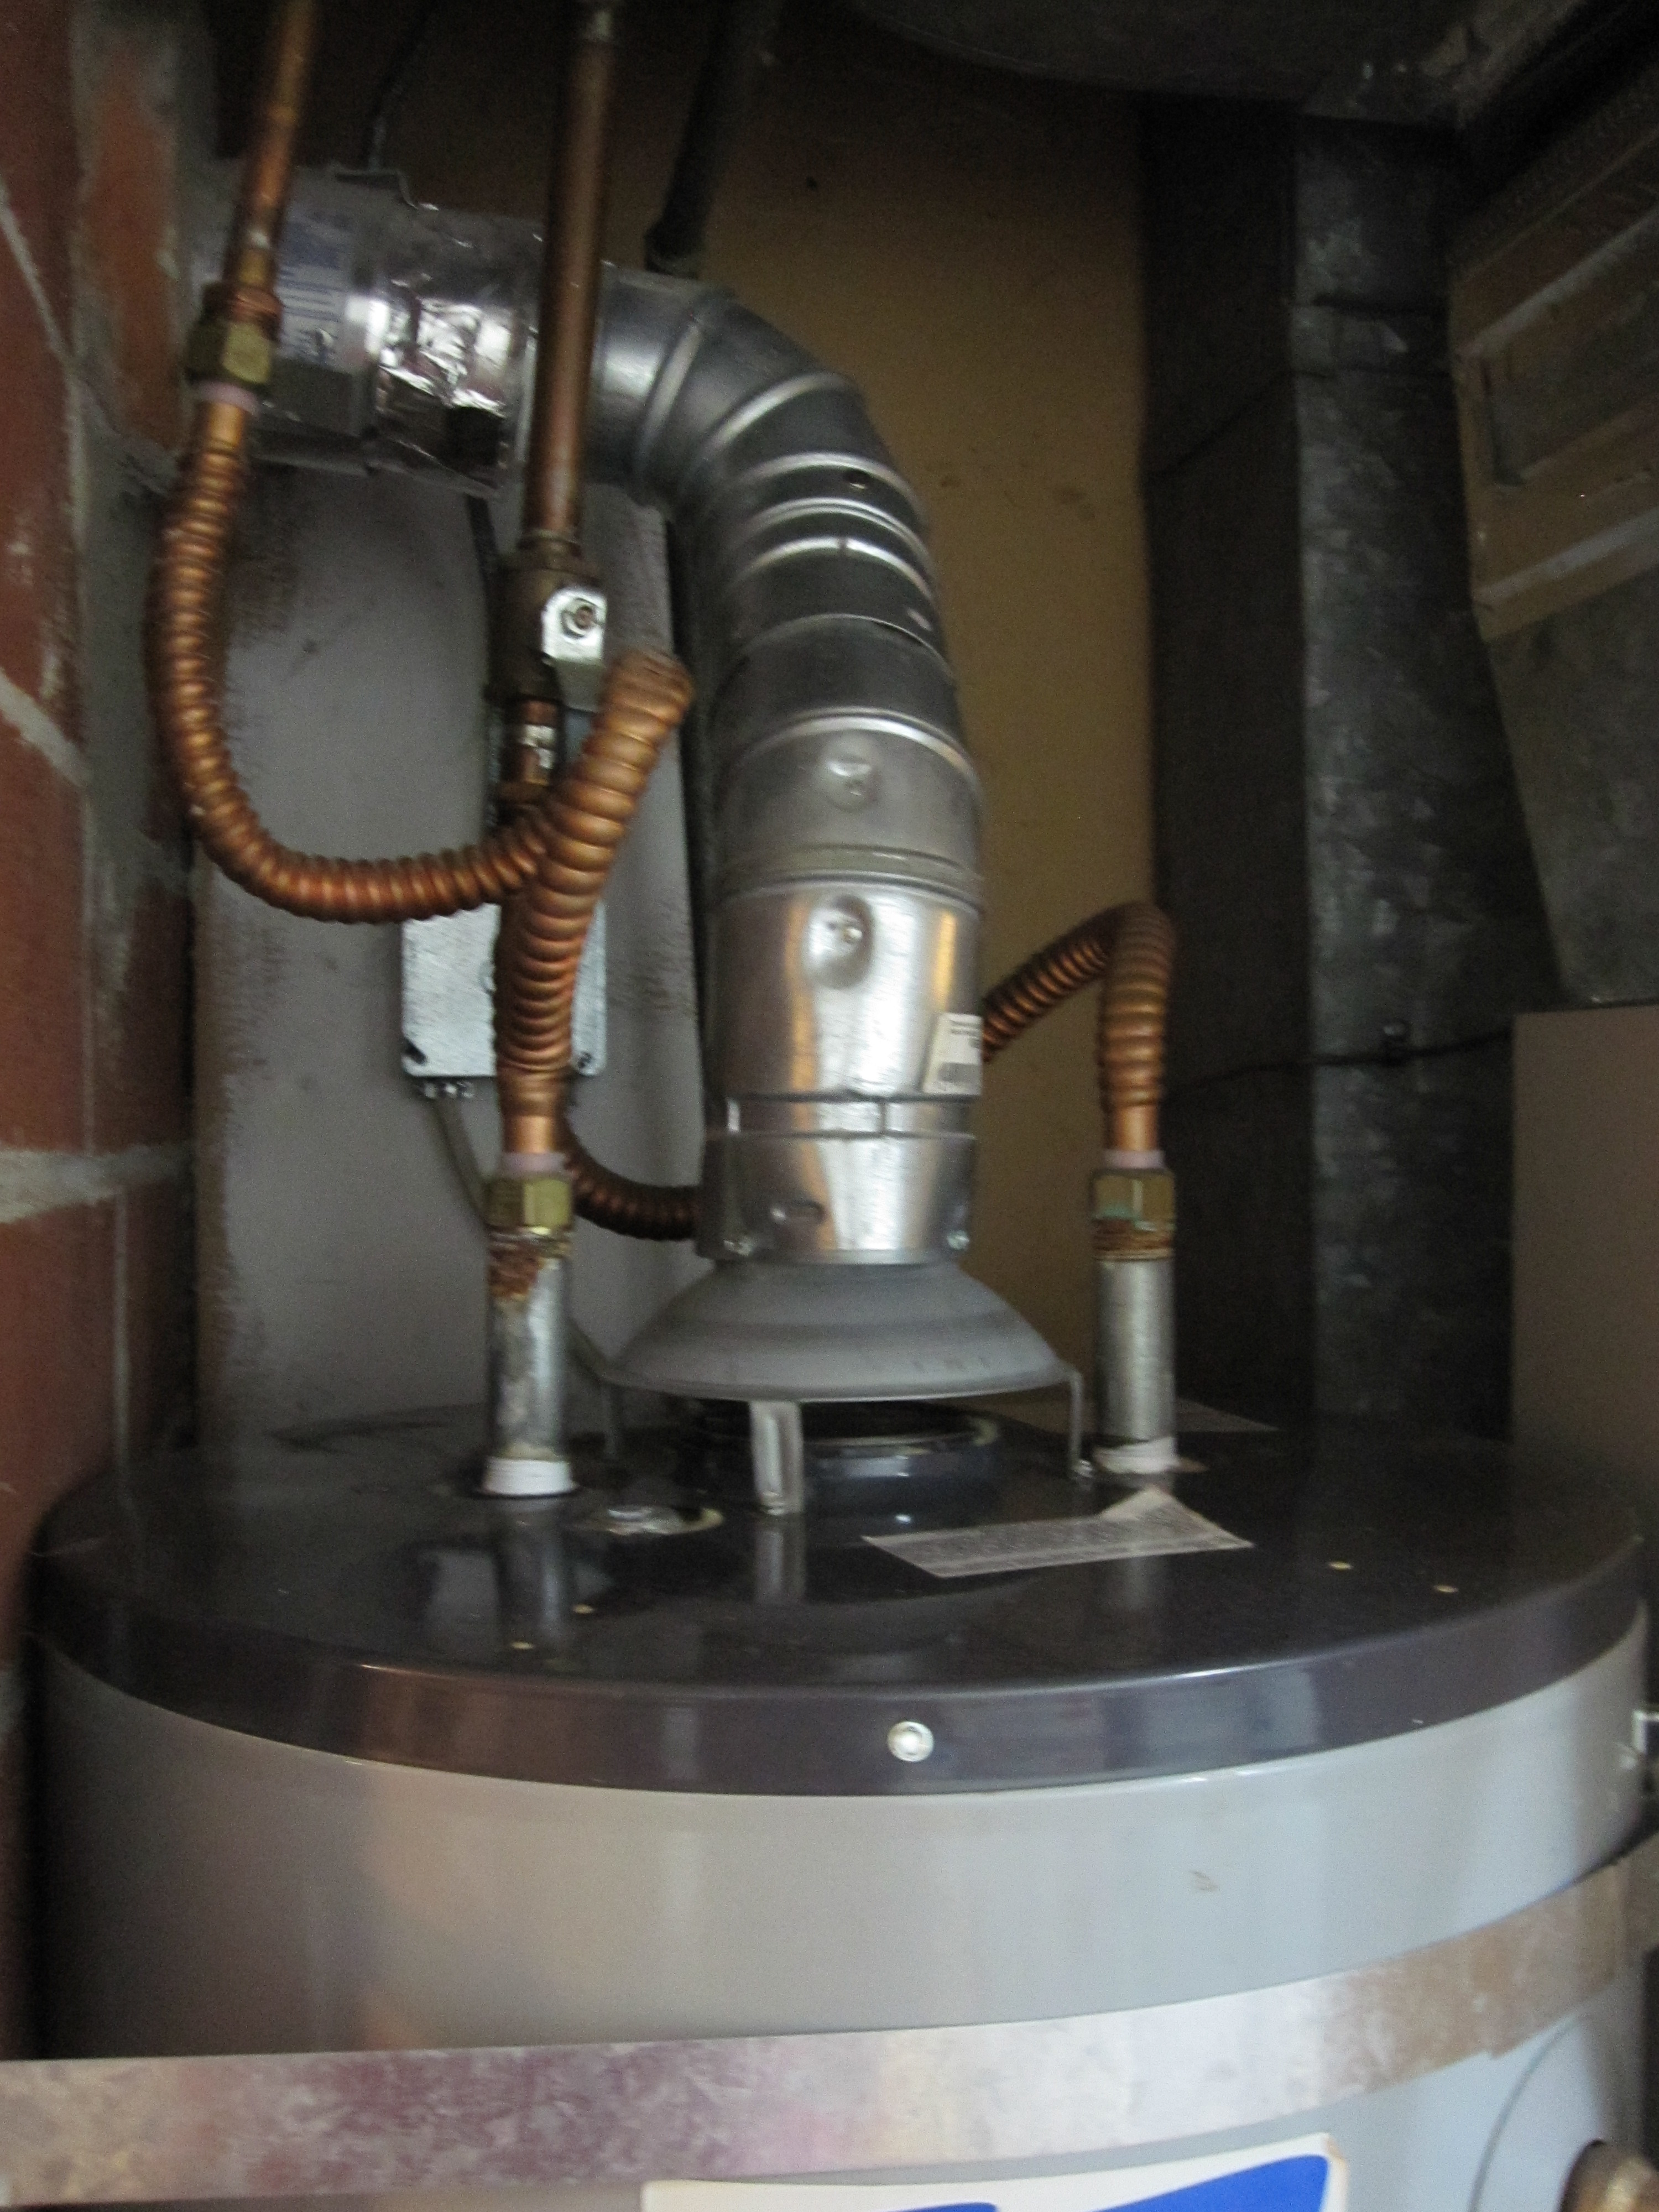 The raised hood at the base of the vent stack on this water heater shows that it is an atmospheric vented gas water heater.